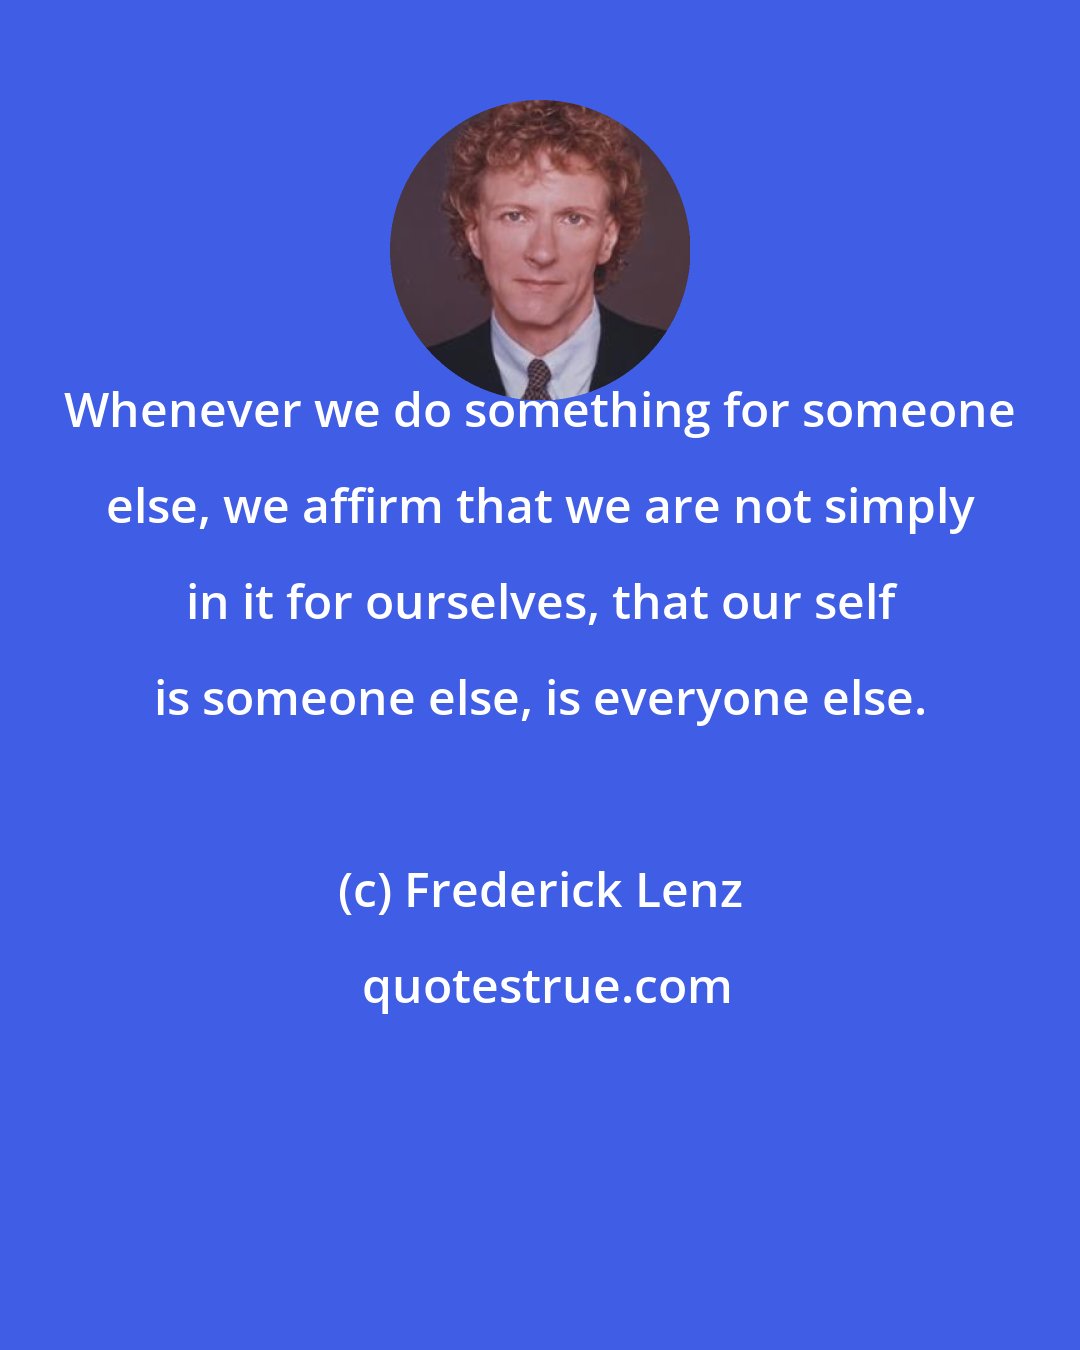 Frederick Lenz: Whenever we do something for someone else, we affirm that we are not simply in it for ourselves, that our self is someone else, is everyone else.